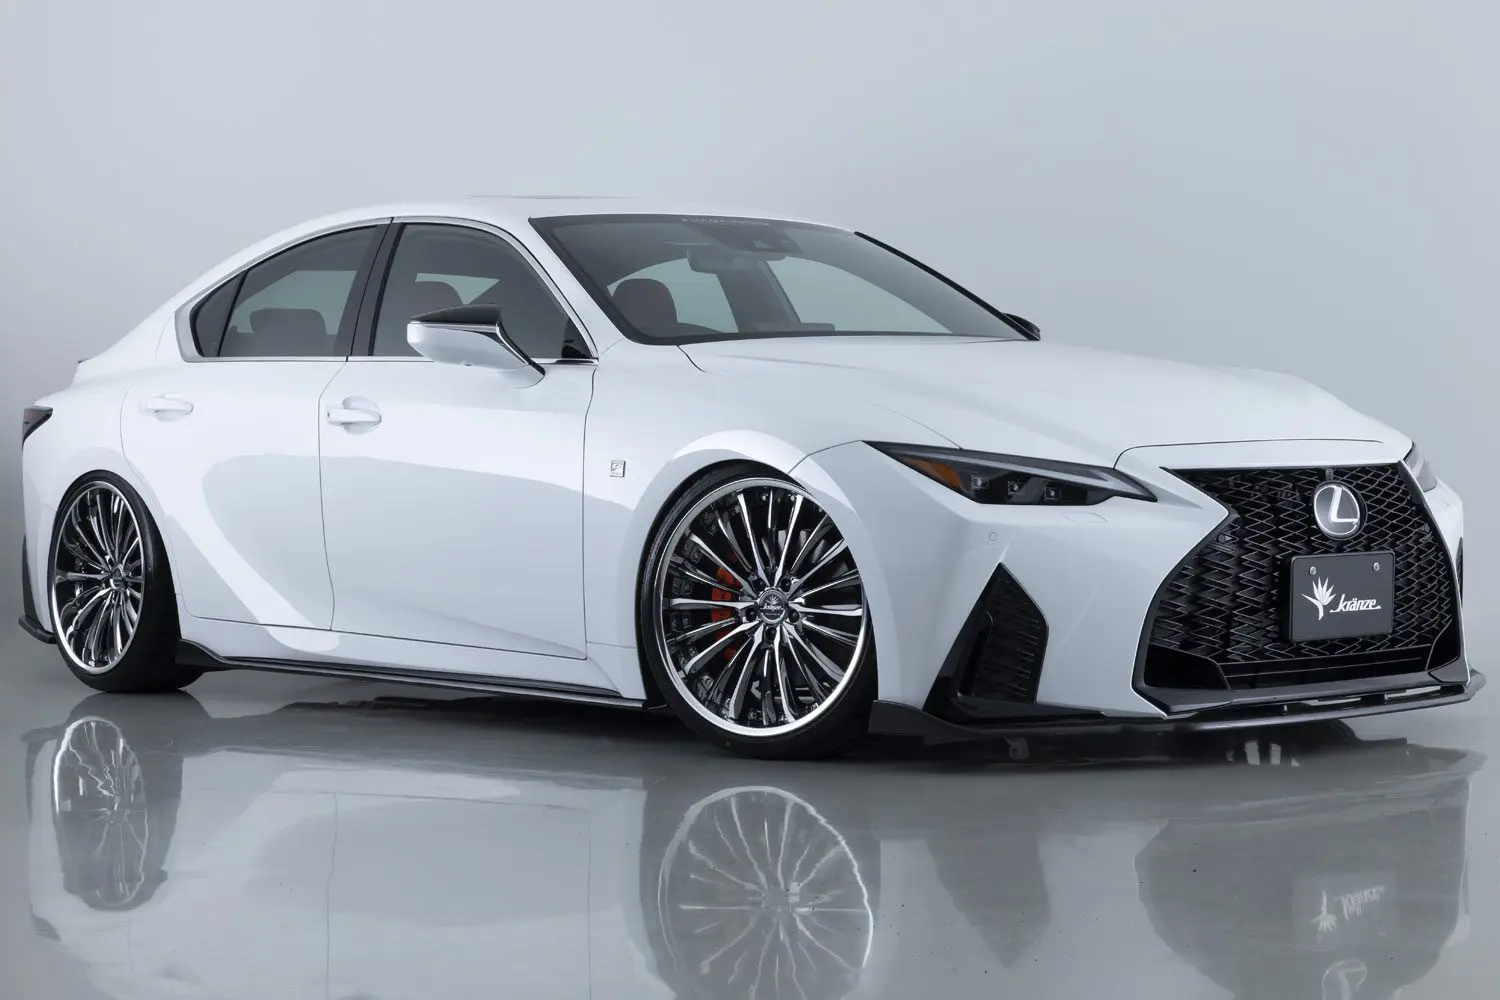 The white lexus rs is parked in a studio.